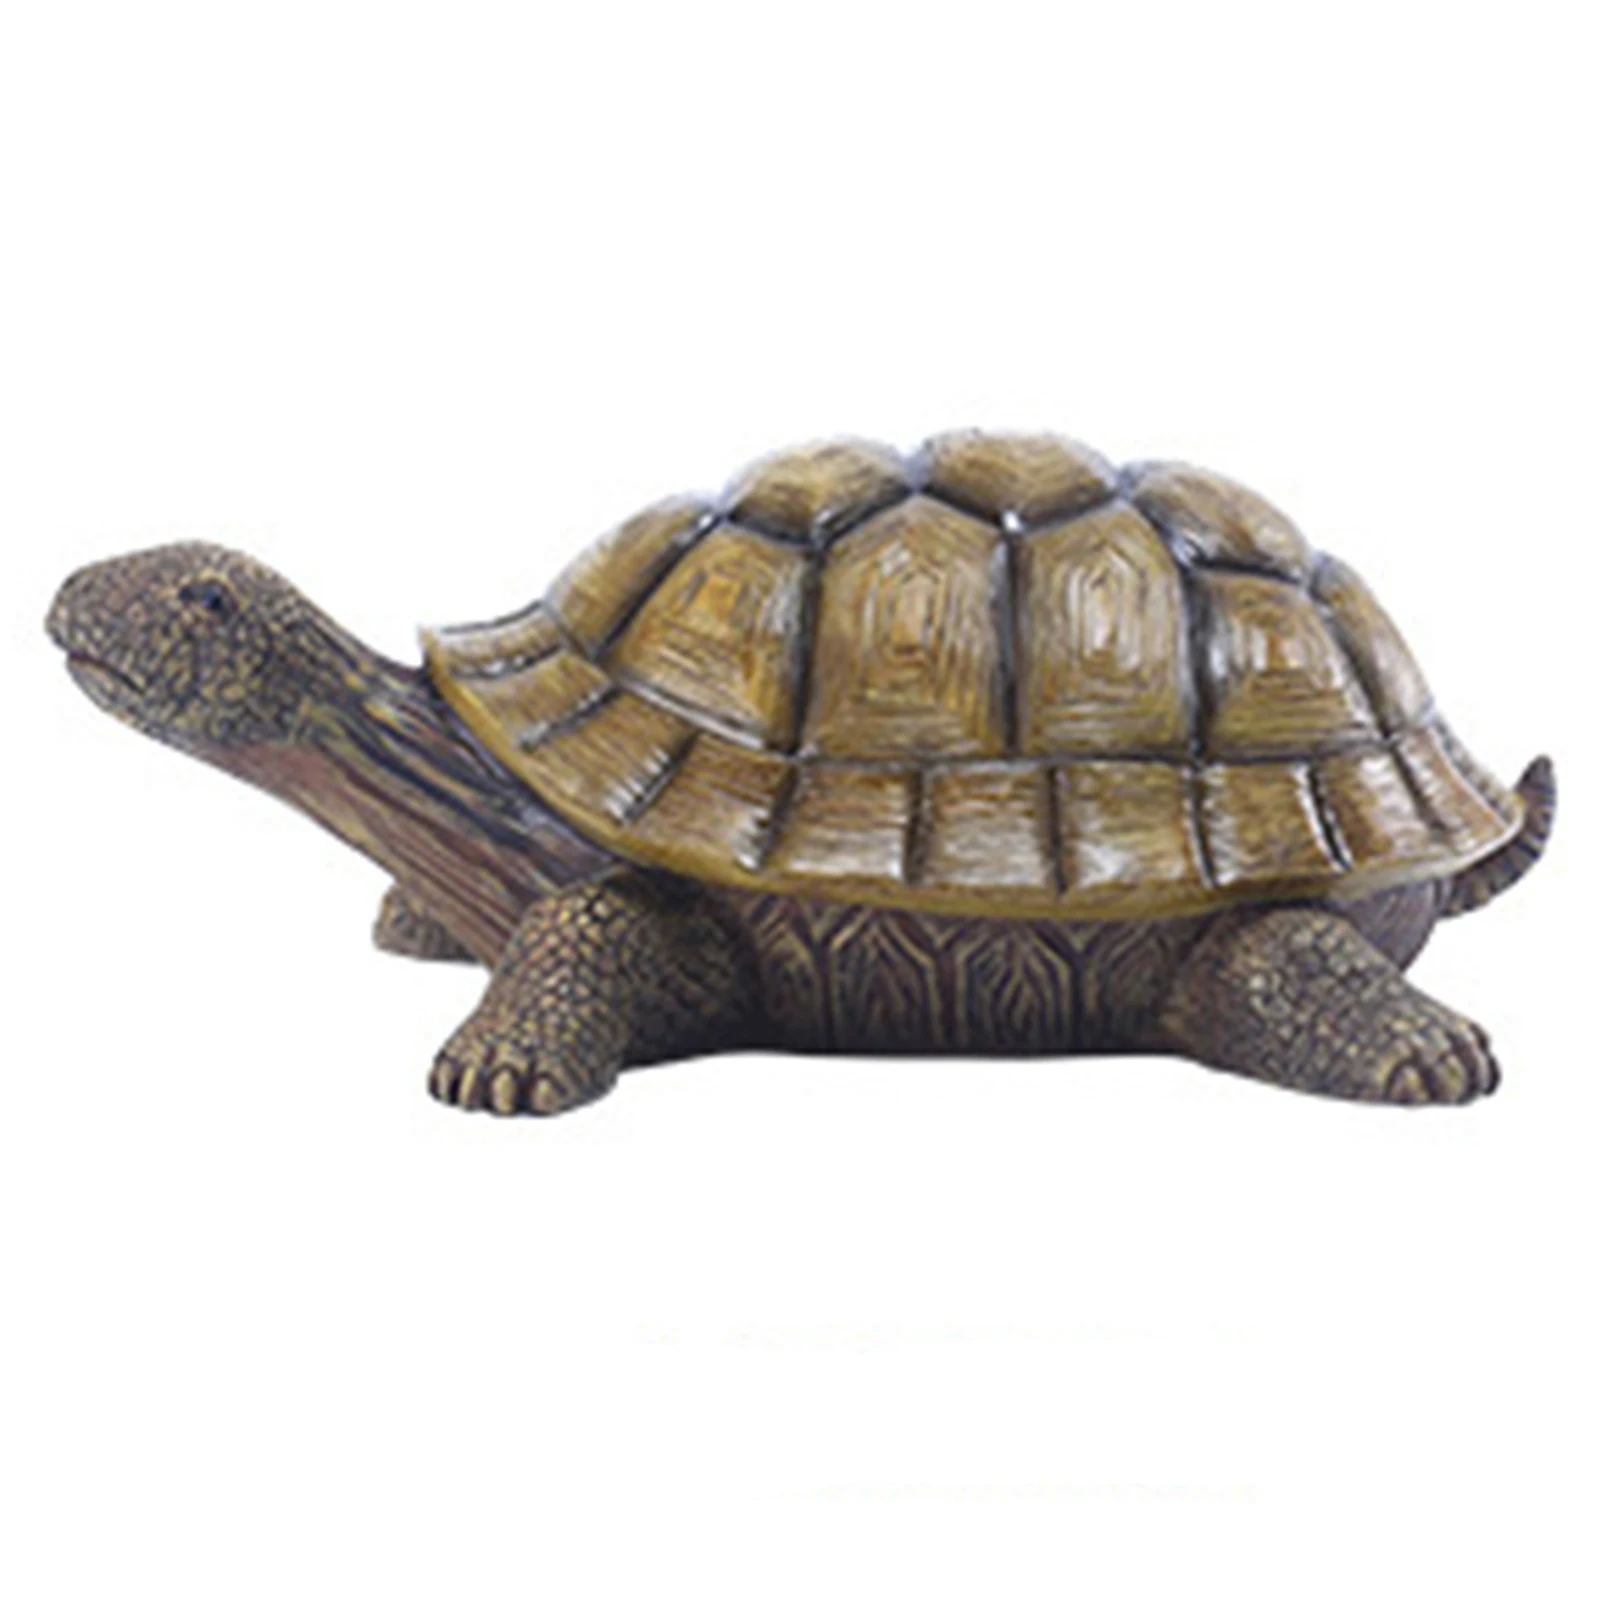 

Resin Crafts Turtle Garden Figurine Simulated Sculpture Decorative Art Ornament for Christmas Gift Birthday Gift